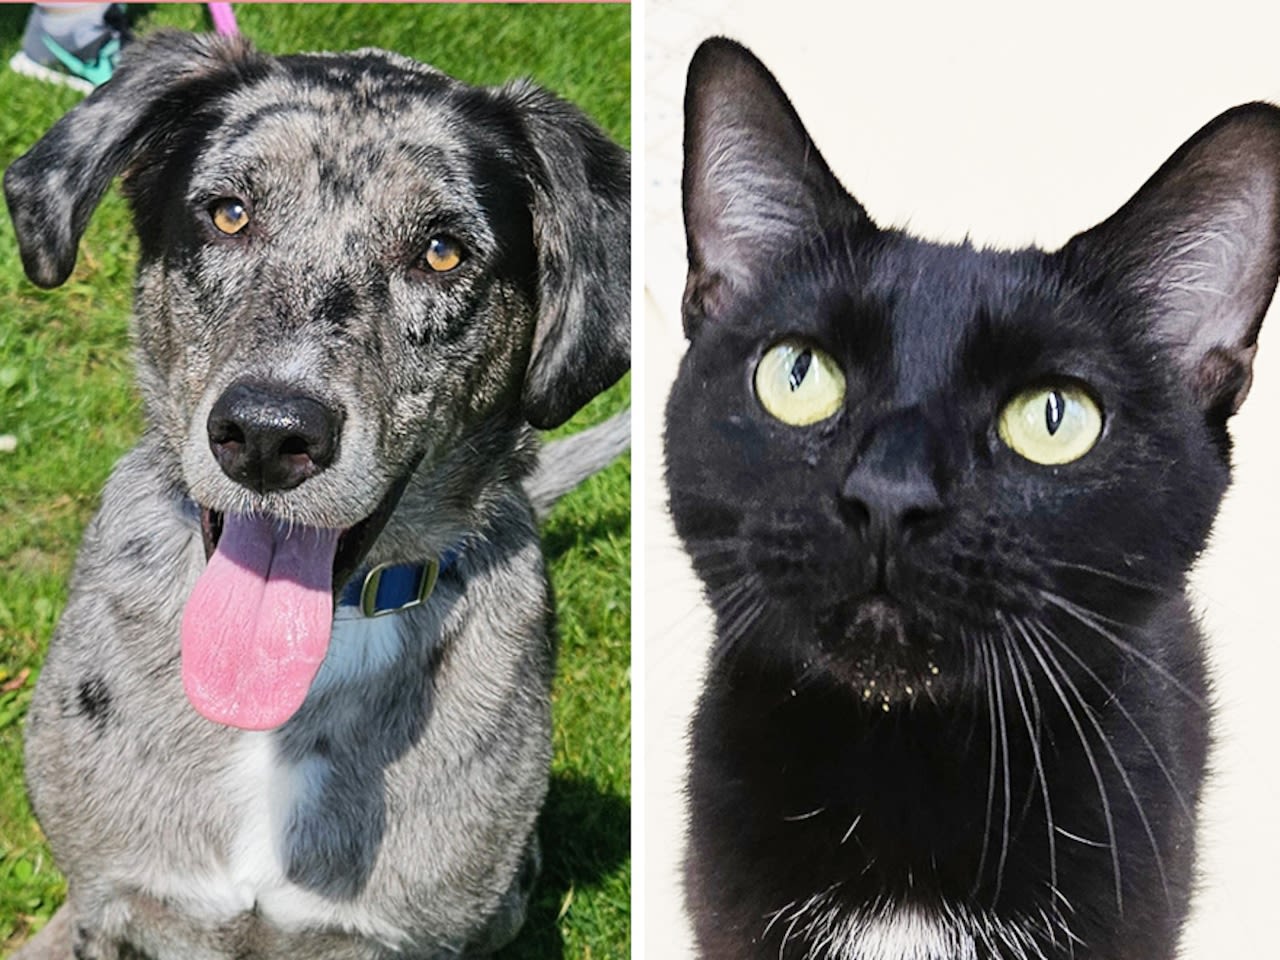 Pets of the week: Rufus is unusual for Michigan. Sushi loves treats